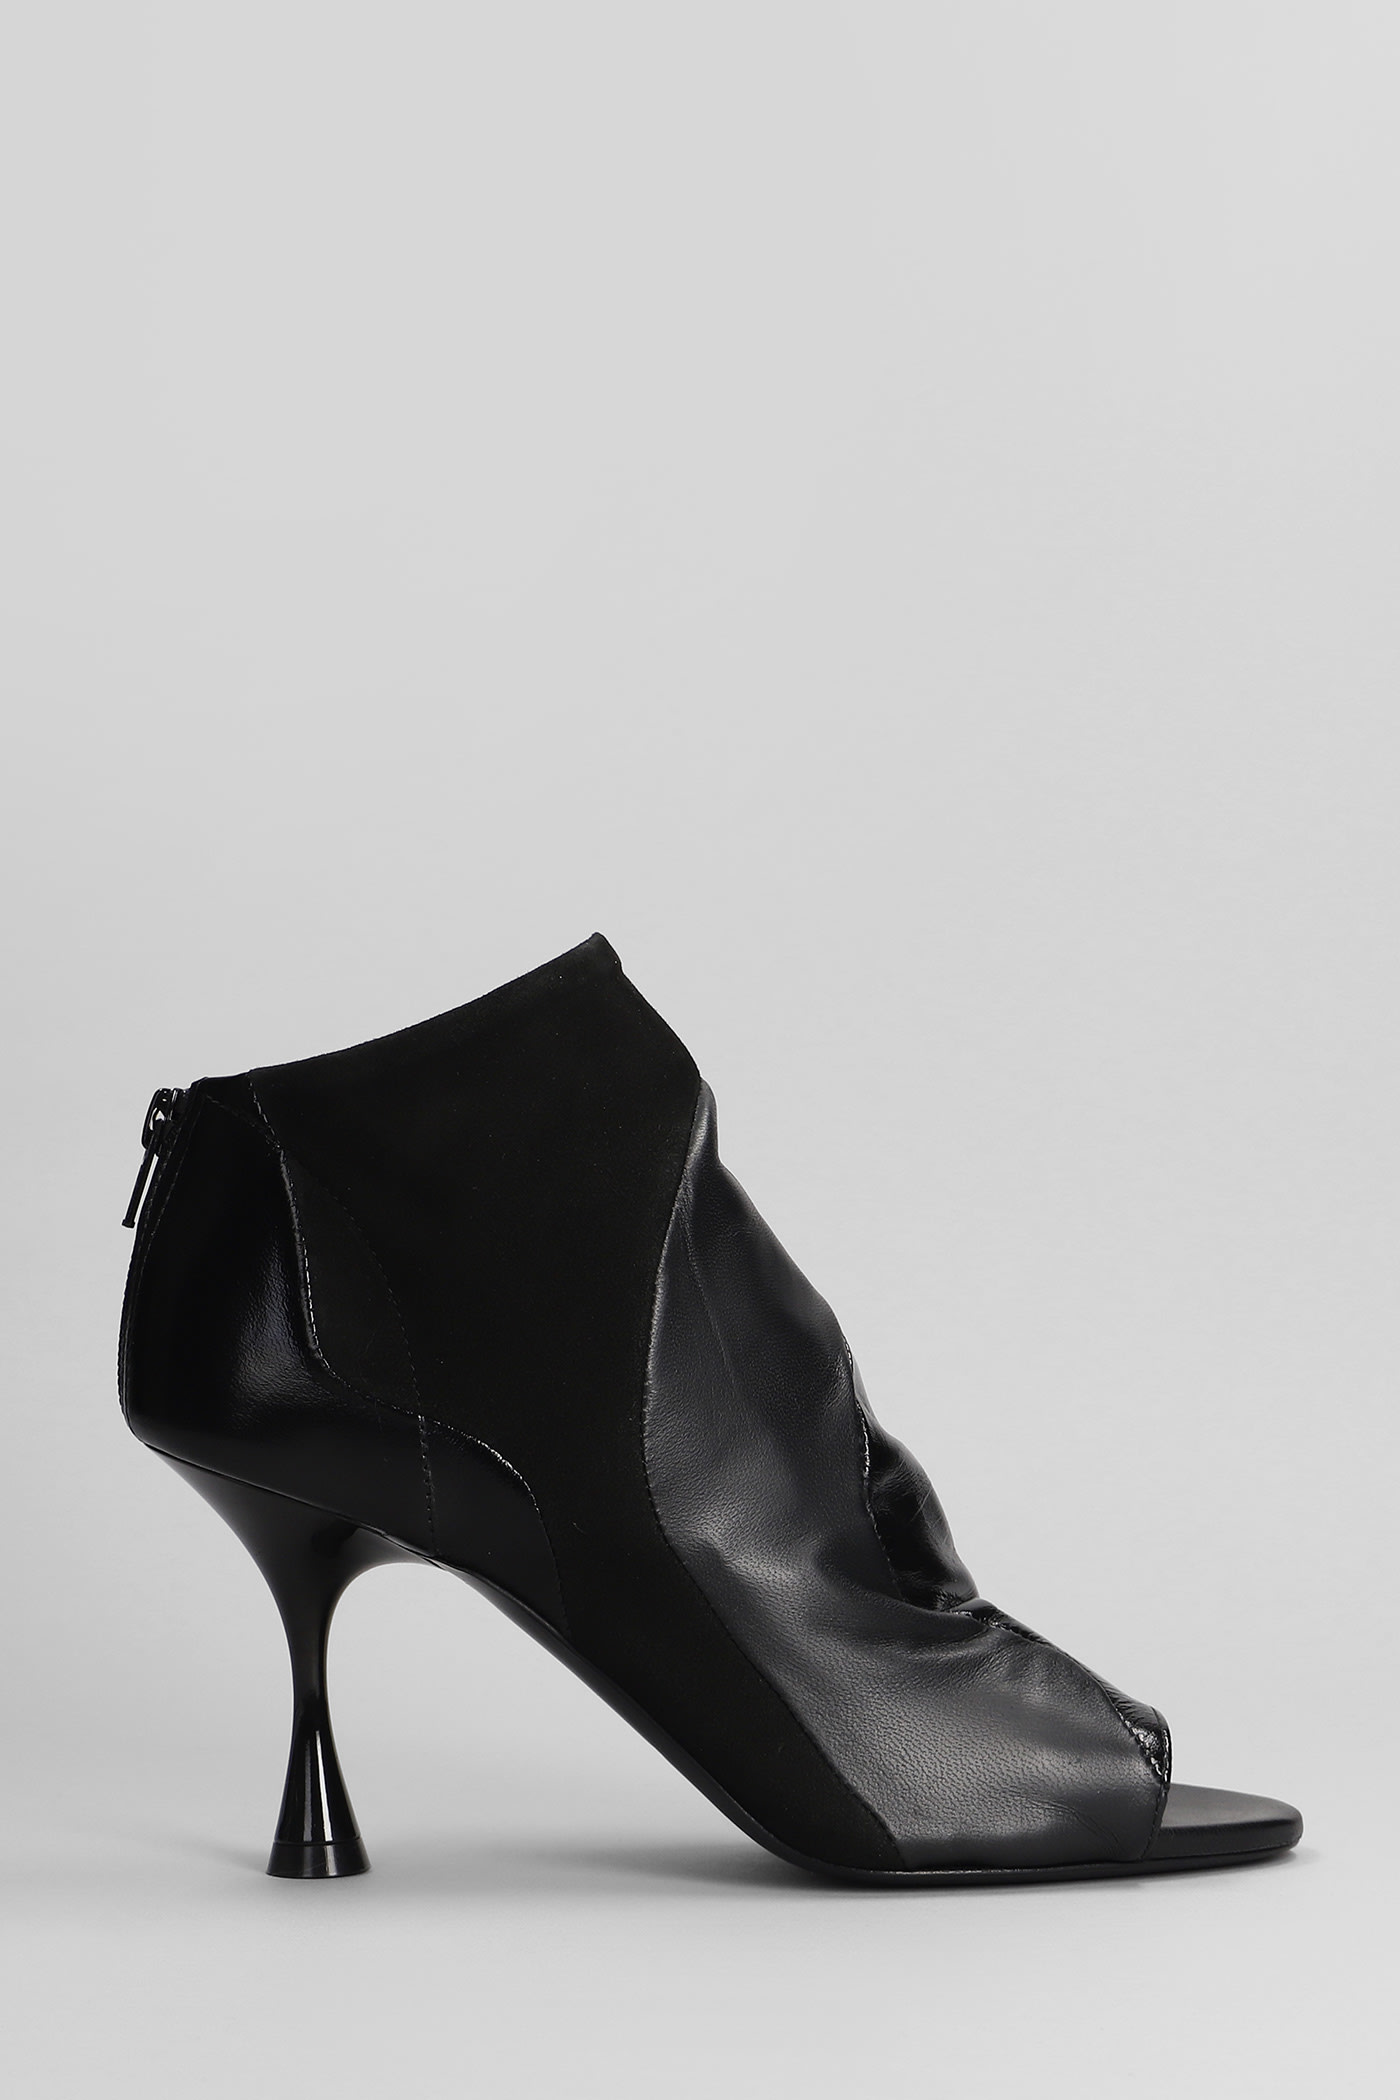 Vortex High Heels Ankle Boots In Black Suede And Leather